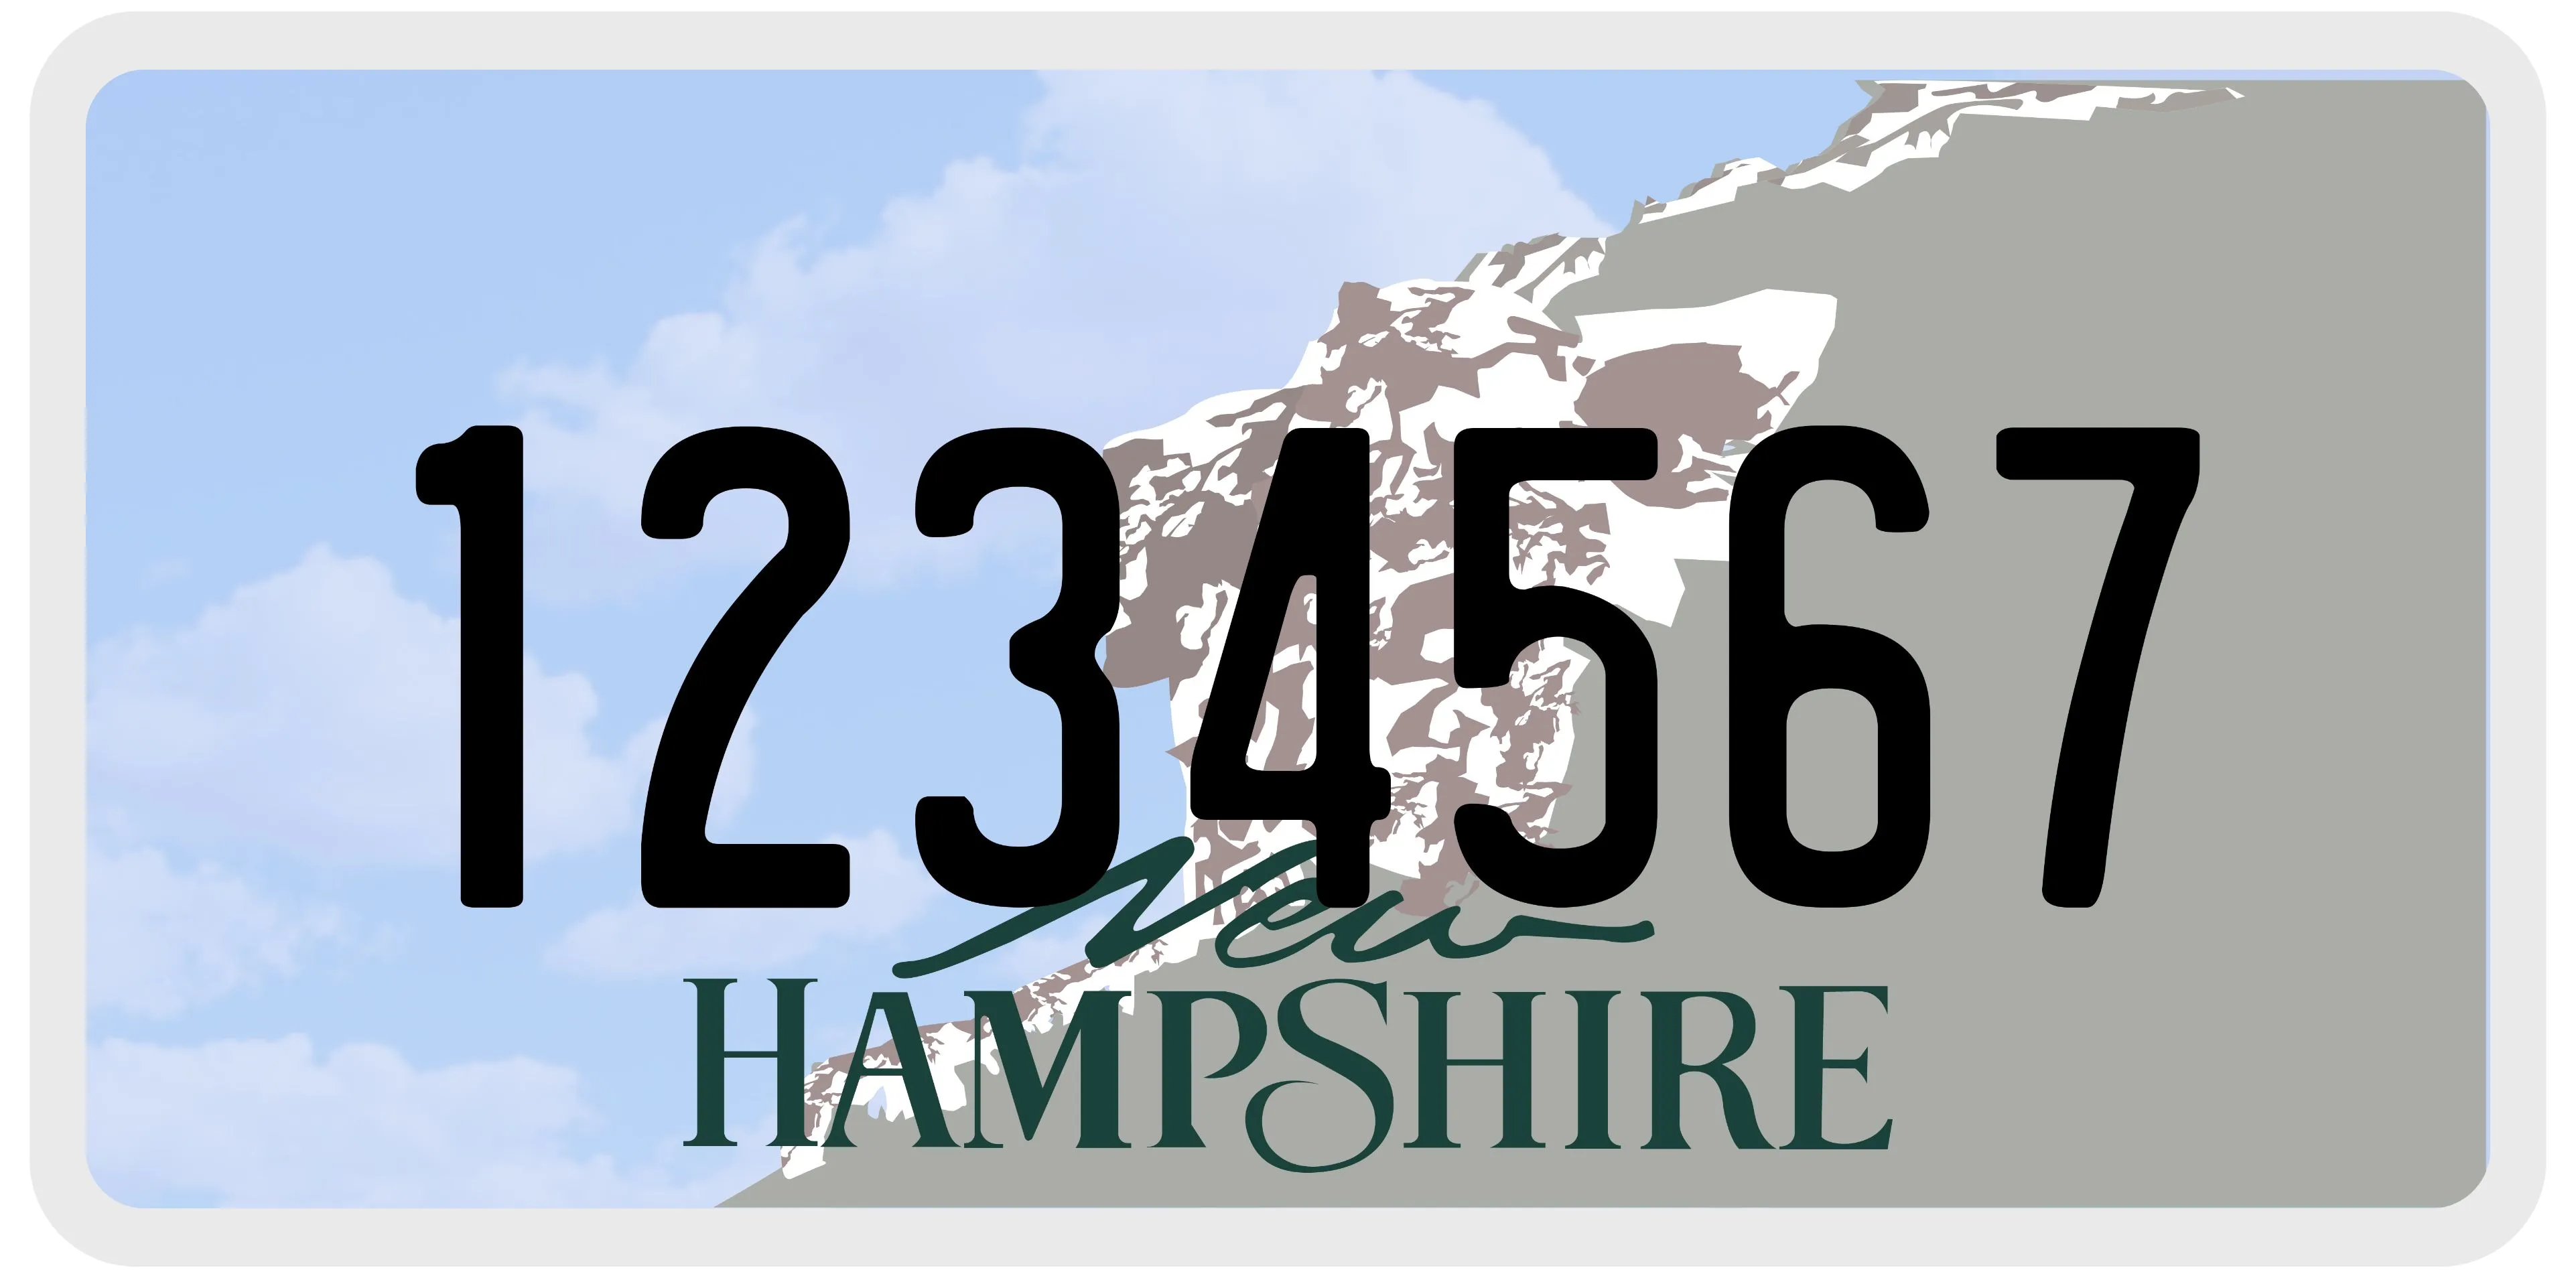 New Hampshire License Plate Sample